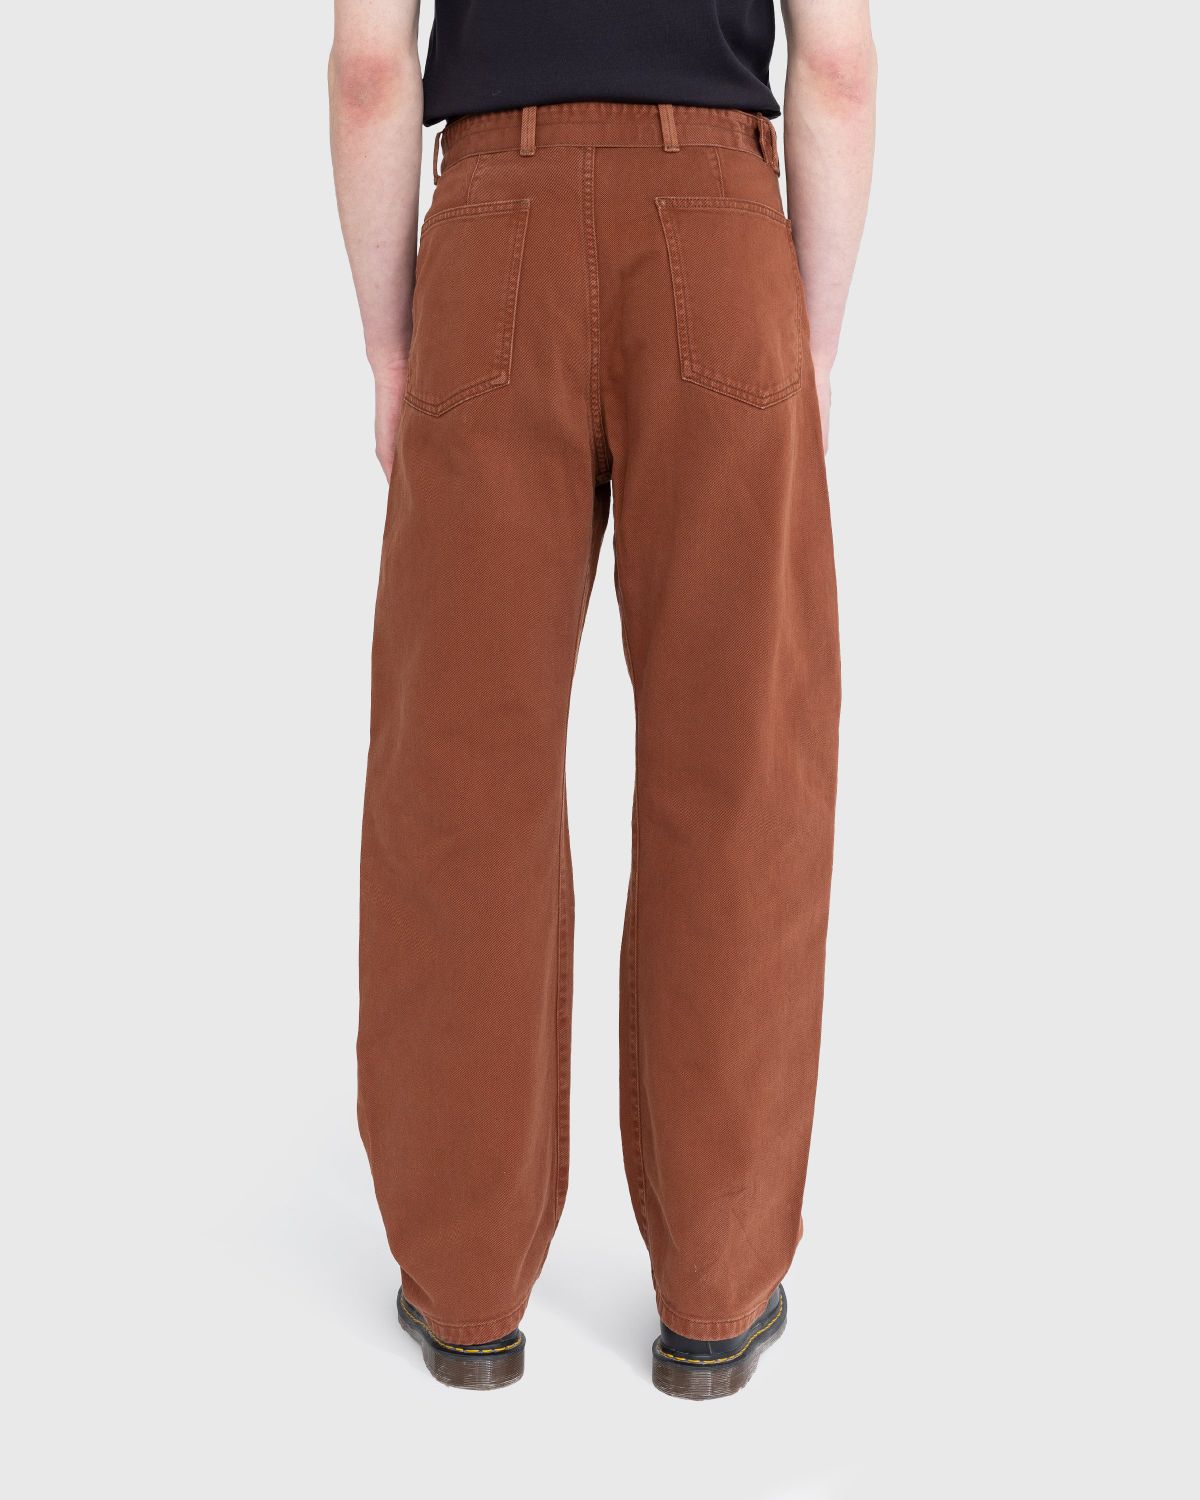 Lemaire – Twisted Belted Pants Brown - Trousers - Brown - Image 3